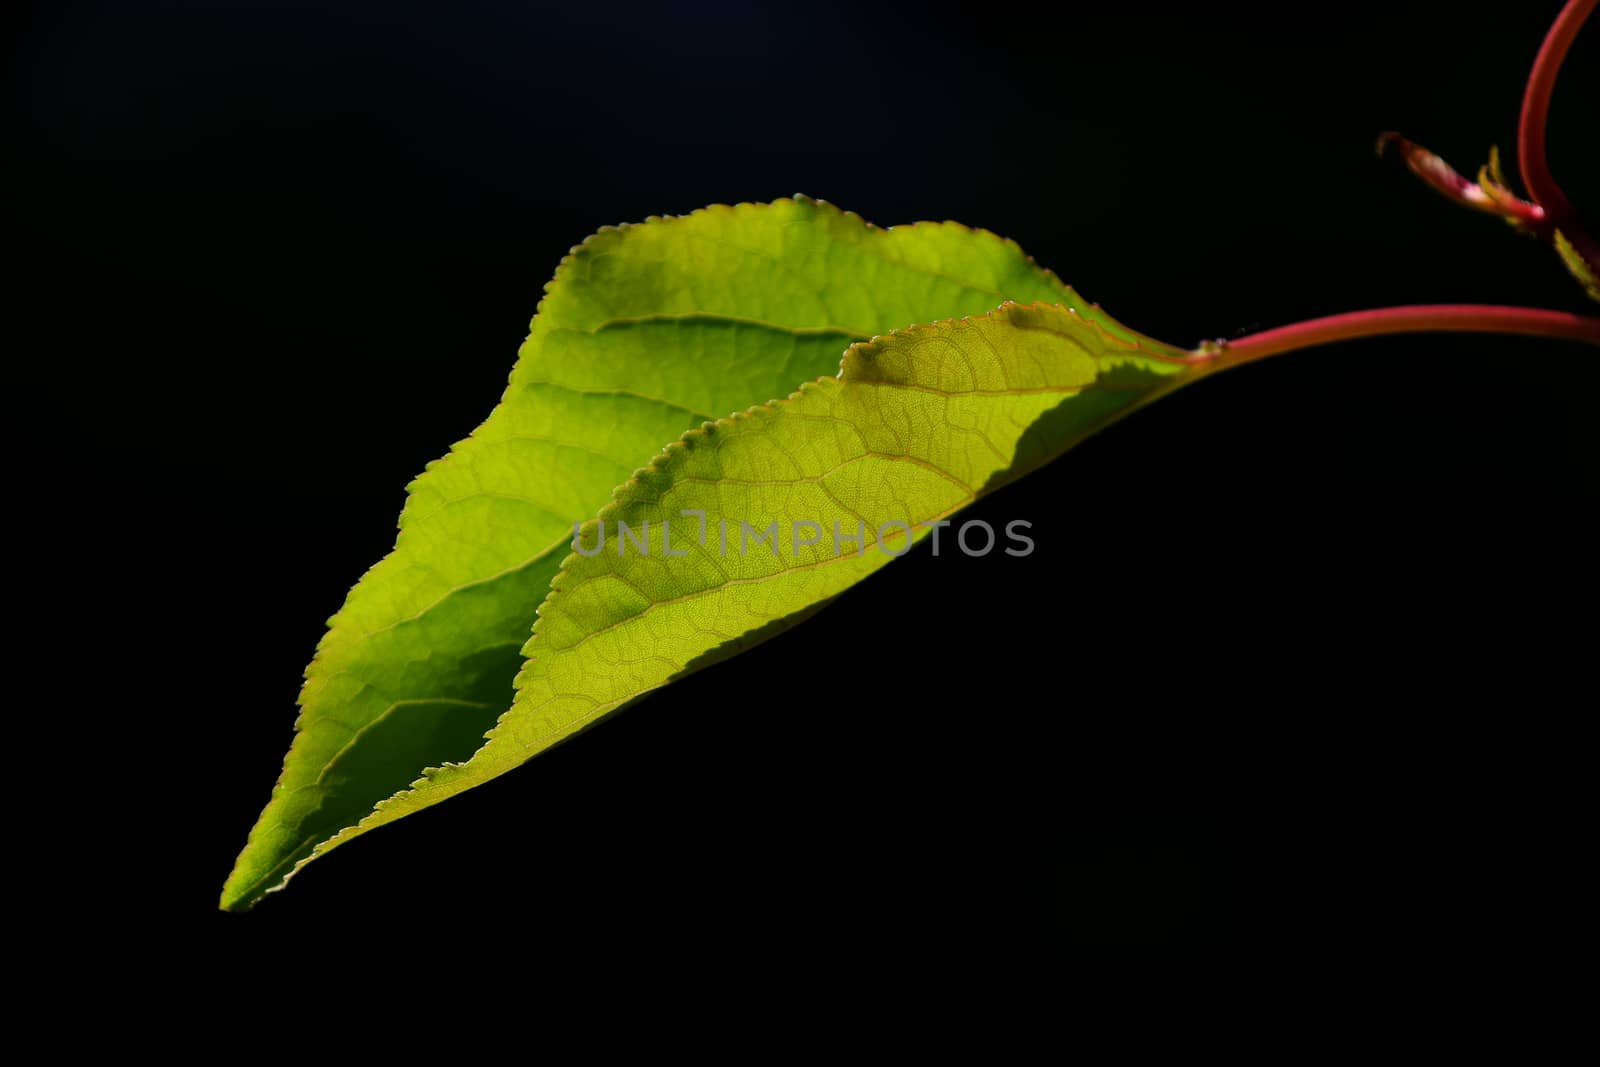 One single apricot tree leave in back lighting on a black background